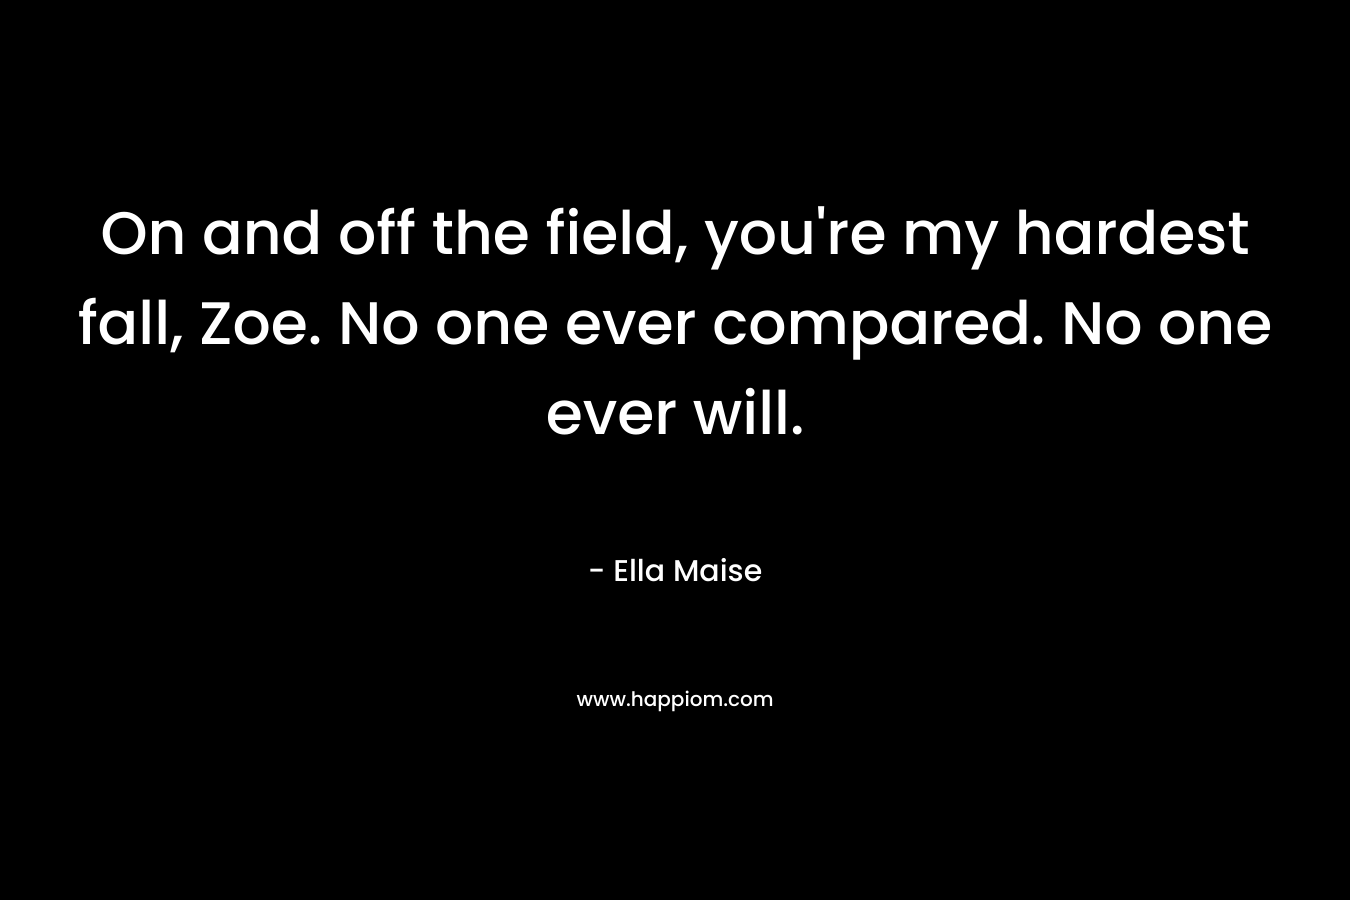 On and off the field, you’re my hardest fall, Zoe. No one ever compared. No one ever will. – Ella Maise